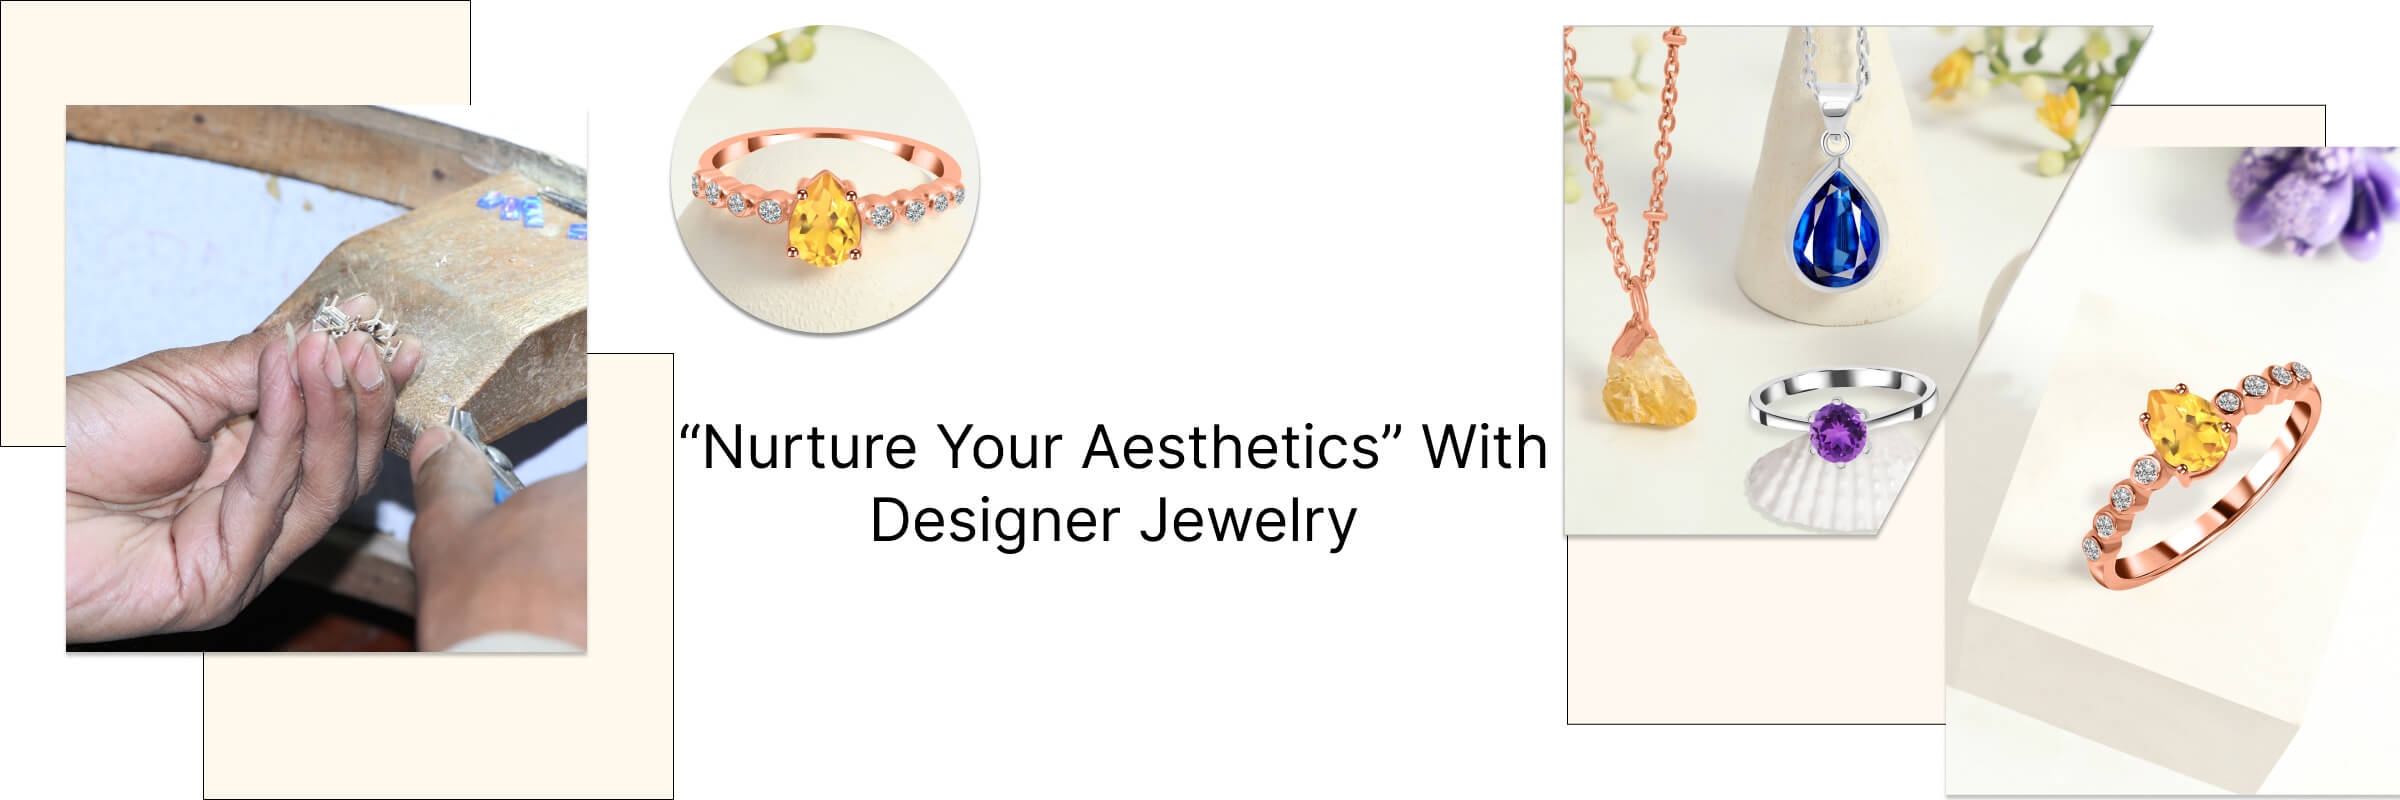 Pampering schedule guides of luxury Designer Jewelry